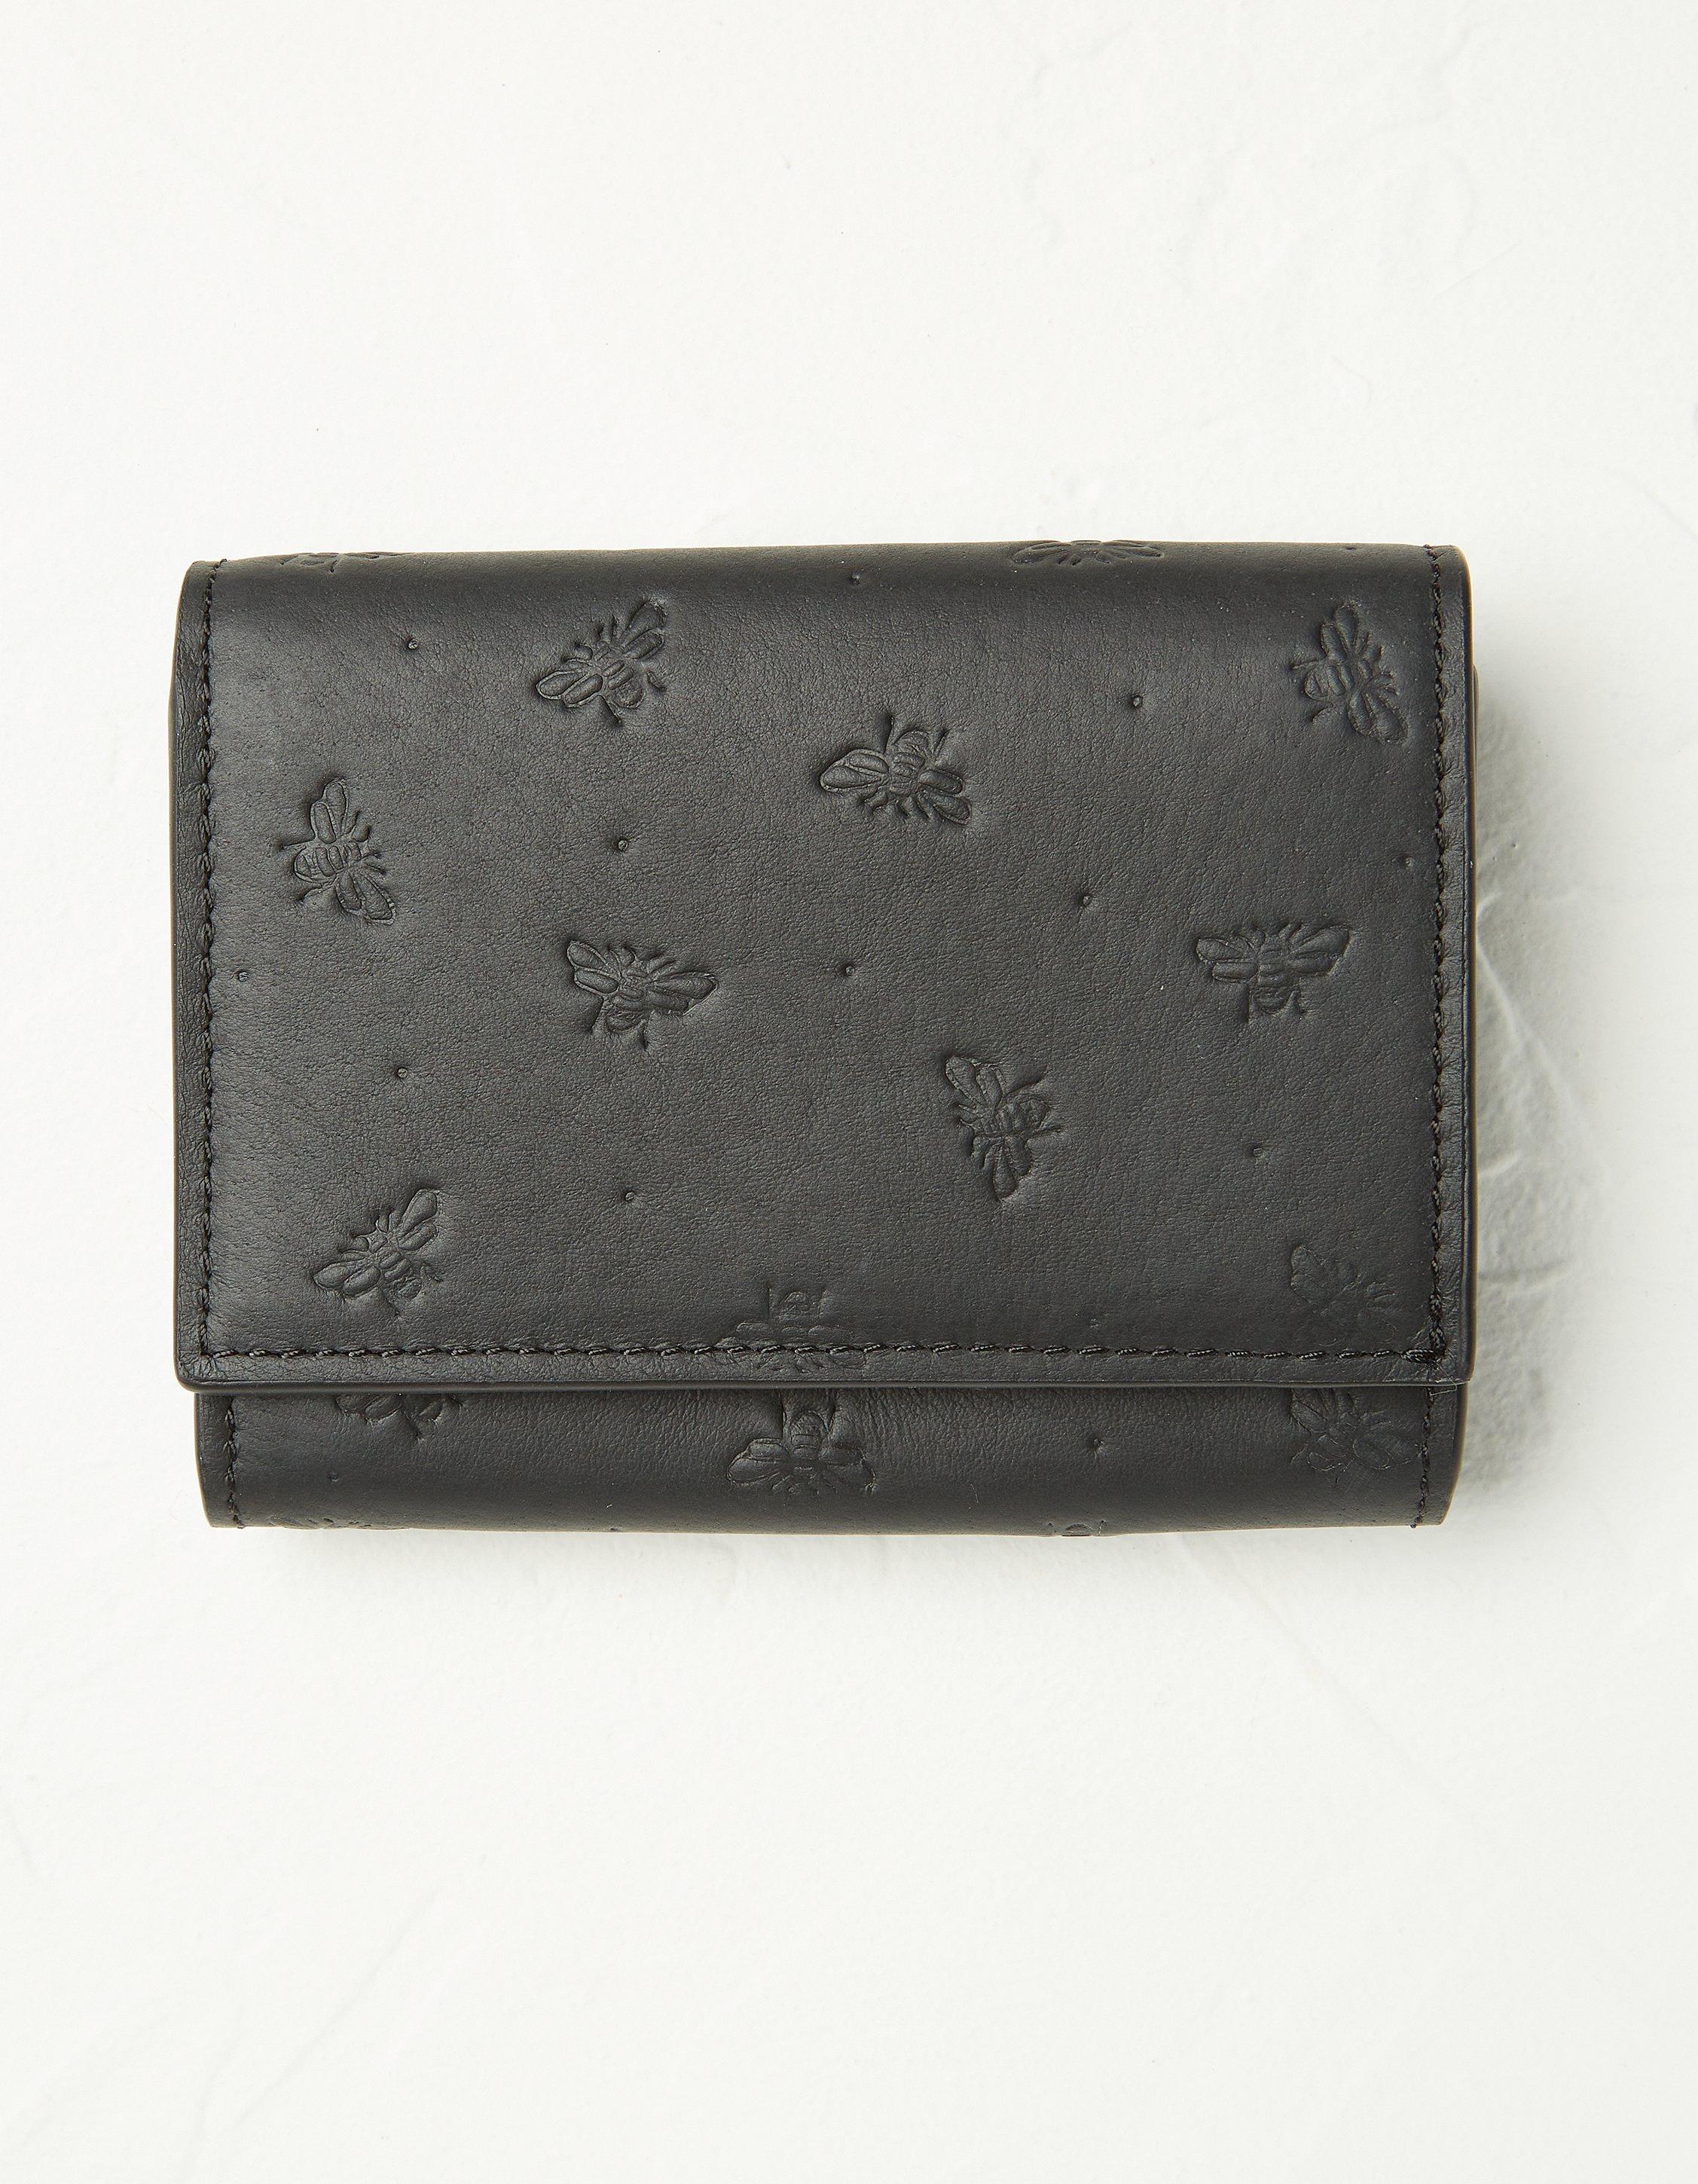 MEDIUM EMBOSSED LOGO LEATHER FLAT POUCH